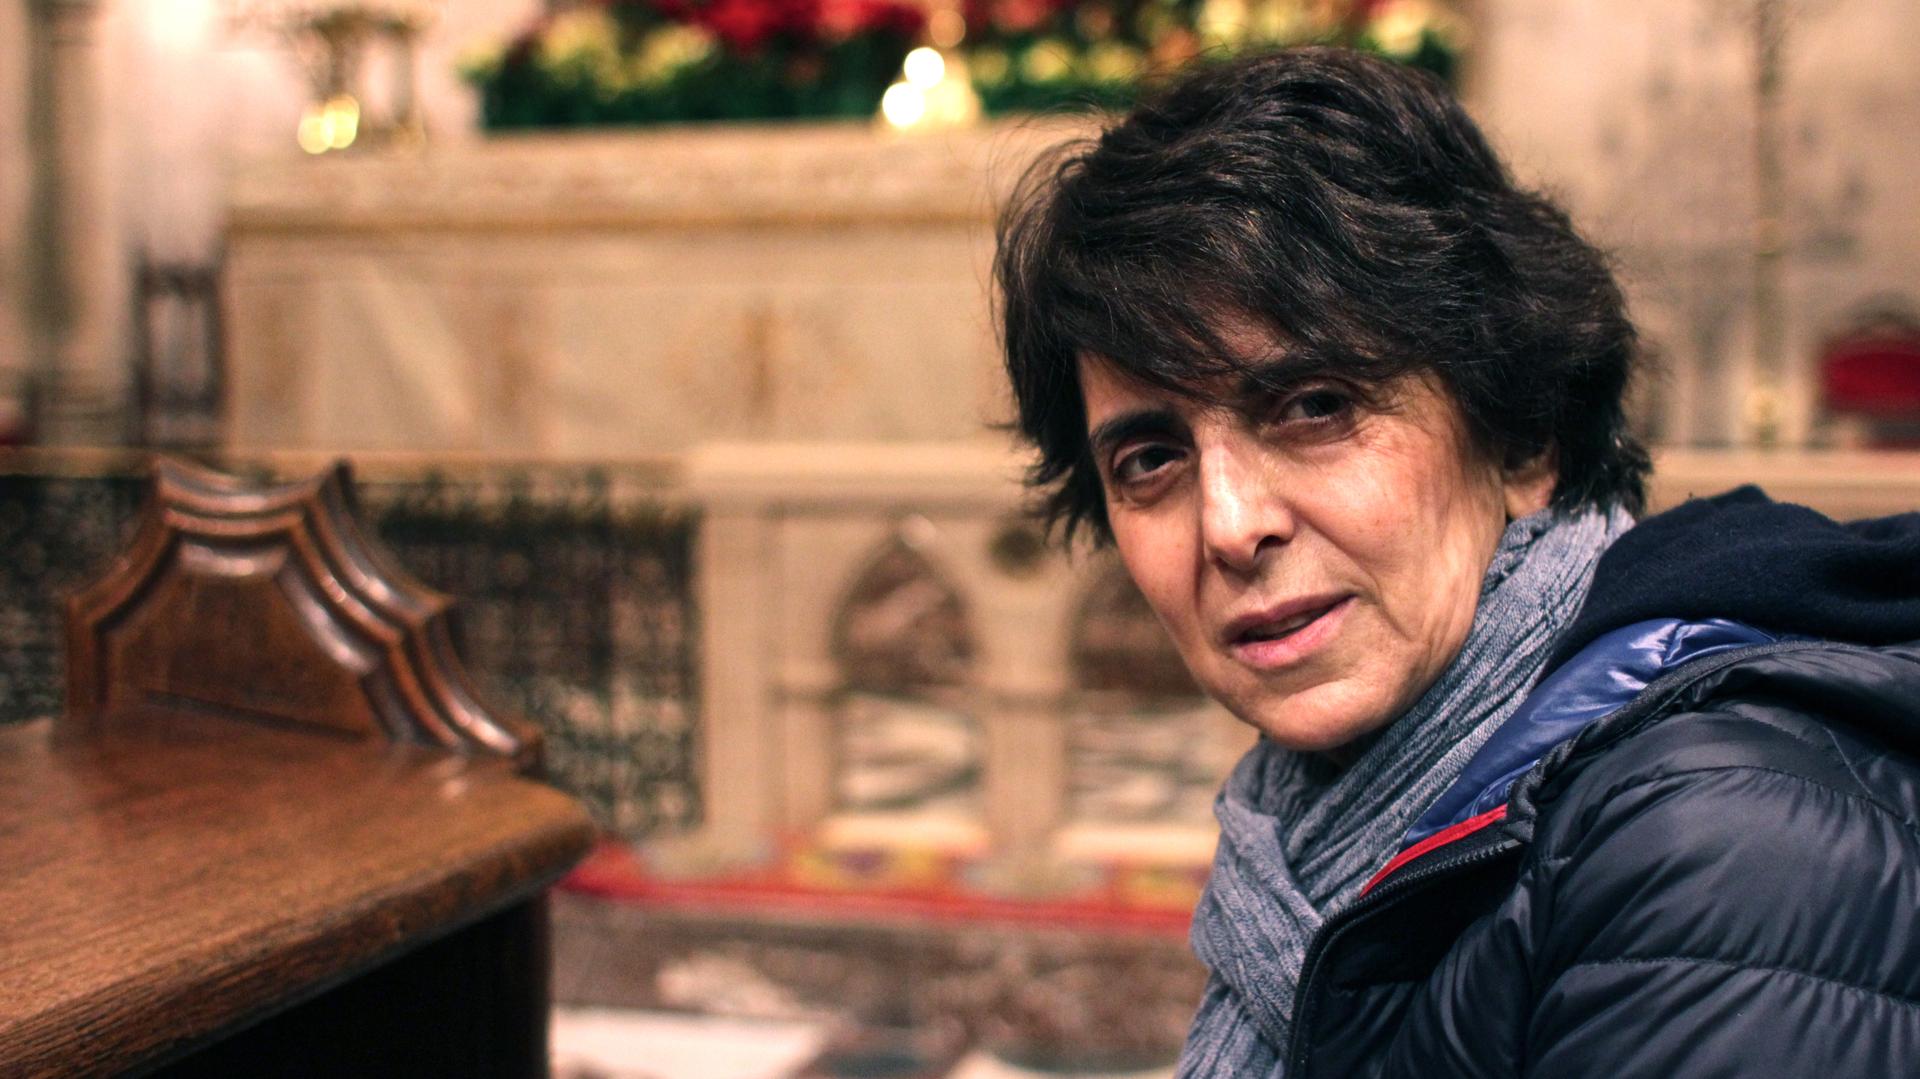 Mary E. Haddad, interim priest at the American Cathedral of Paris, sees silence as form of worship.